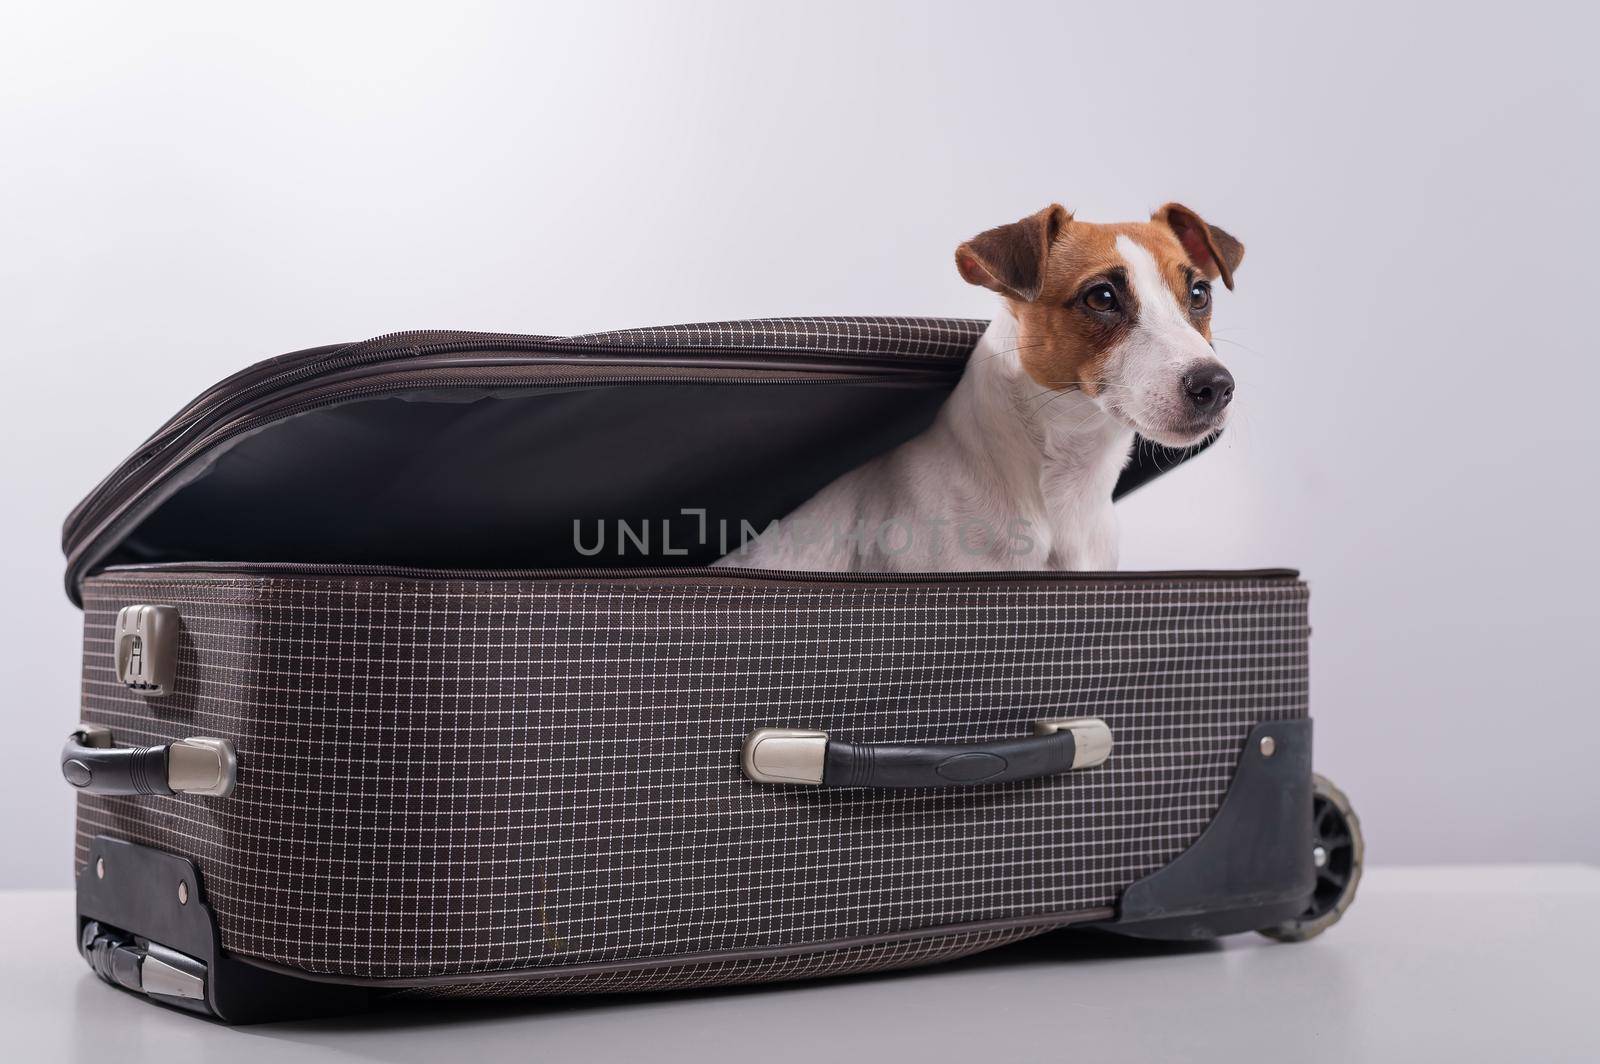 The dog is hiding in a suitcase on a white background. Jack Russell Terrier peeks out of his luggage bag.